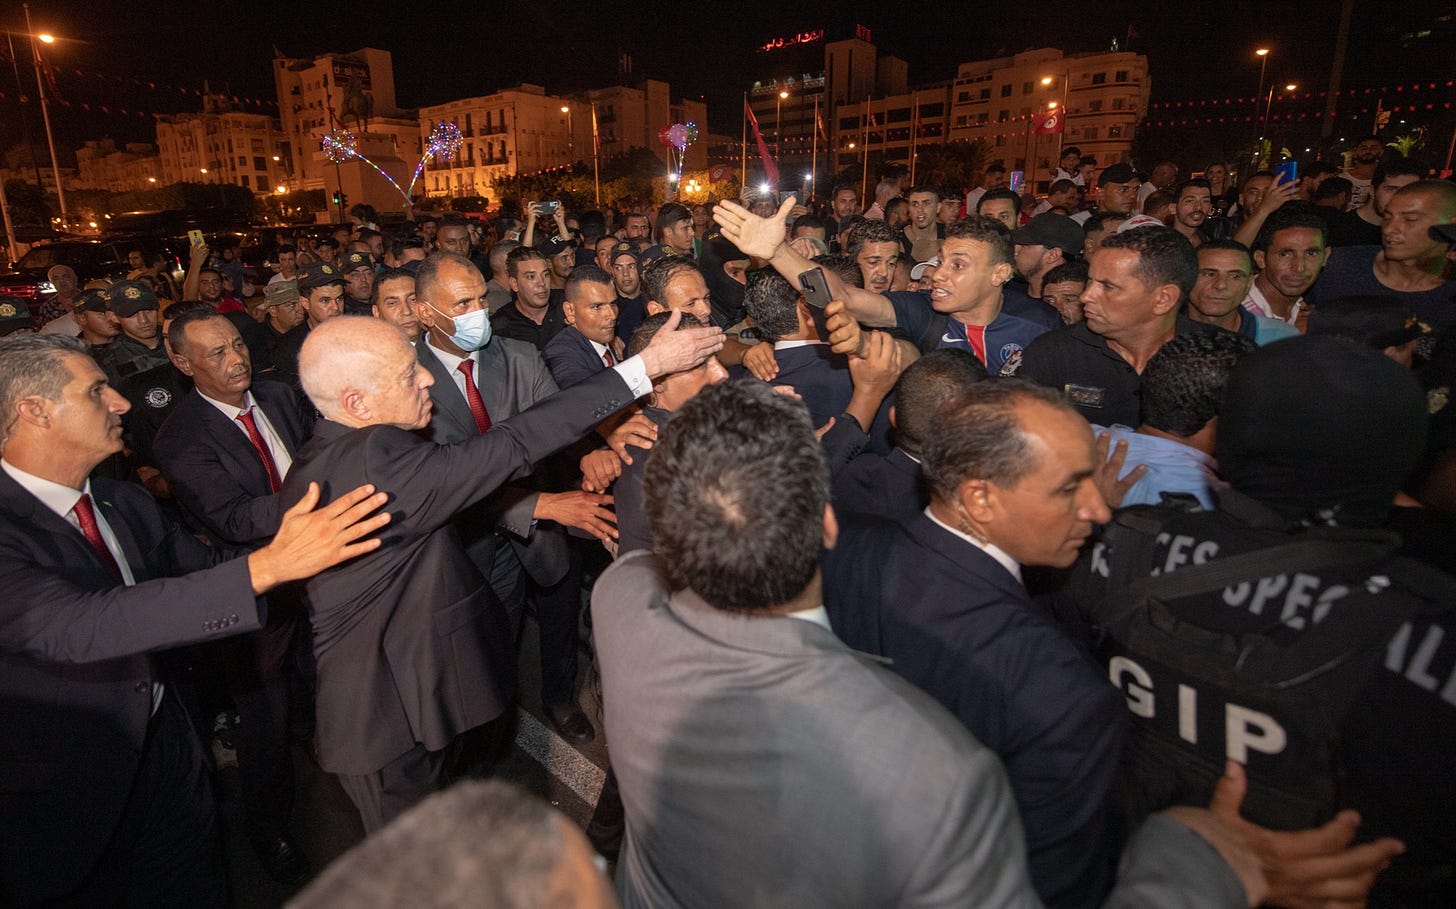 President Kais Saied meeting supporters along the Habib Bourguiba Avenue in capital Tunis, Tunisia on July 26, 2022 after the referendum result (Image: Twitter/@TnPresidency).